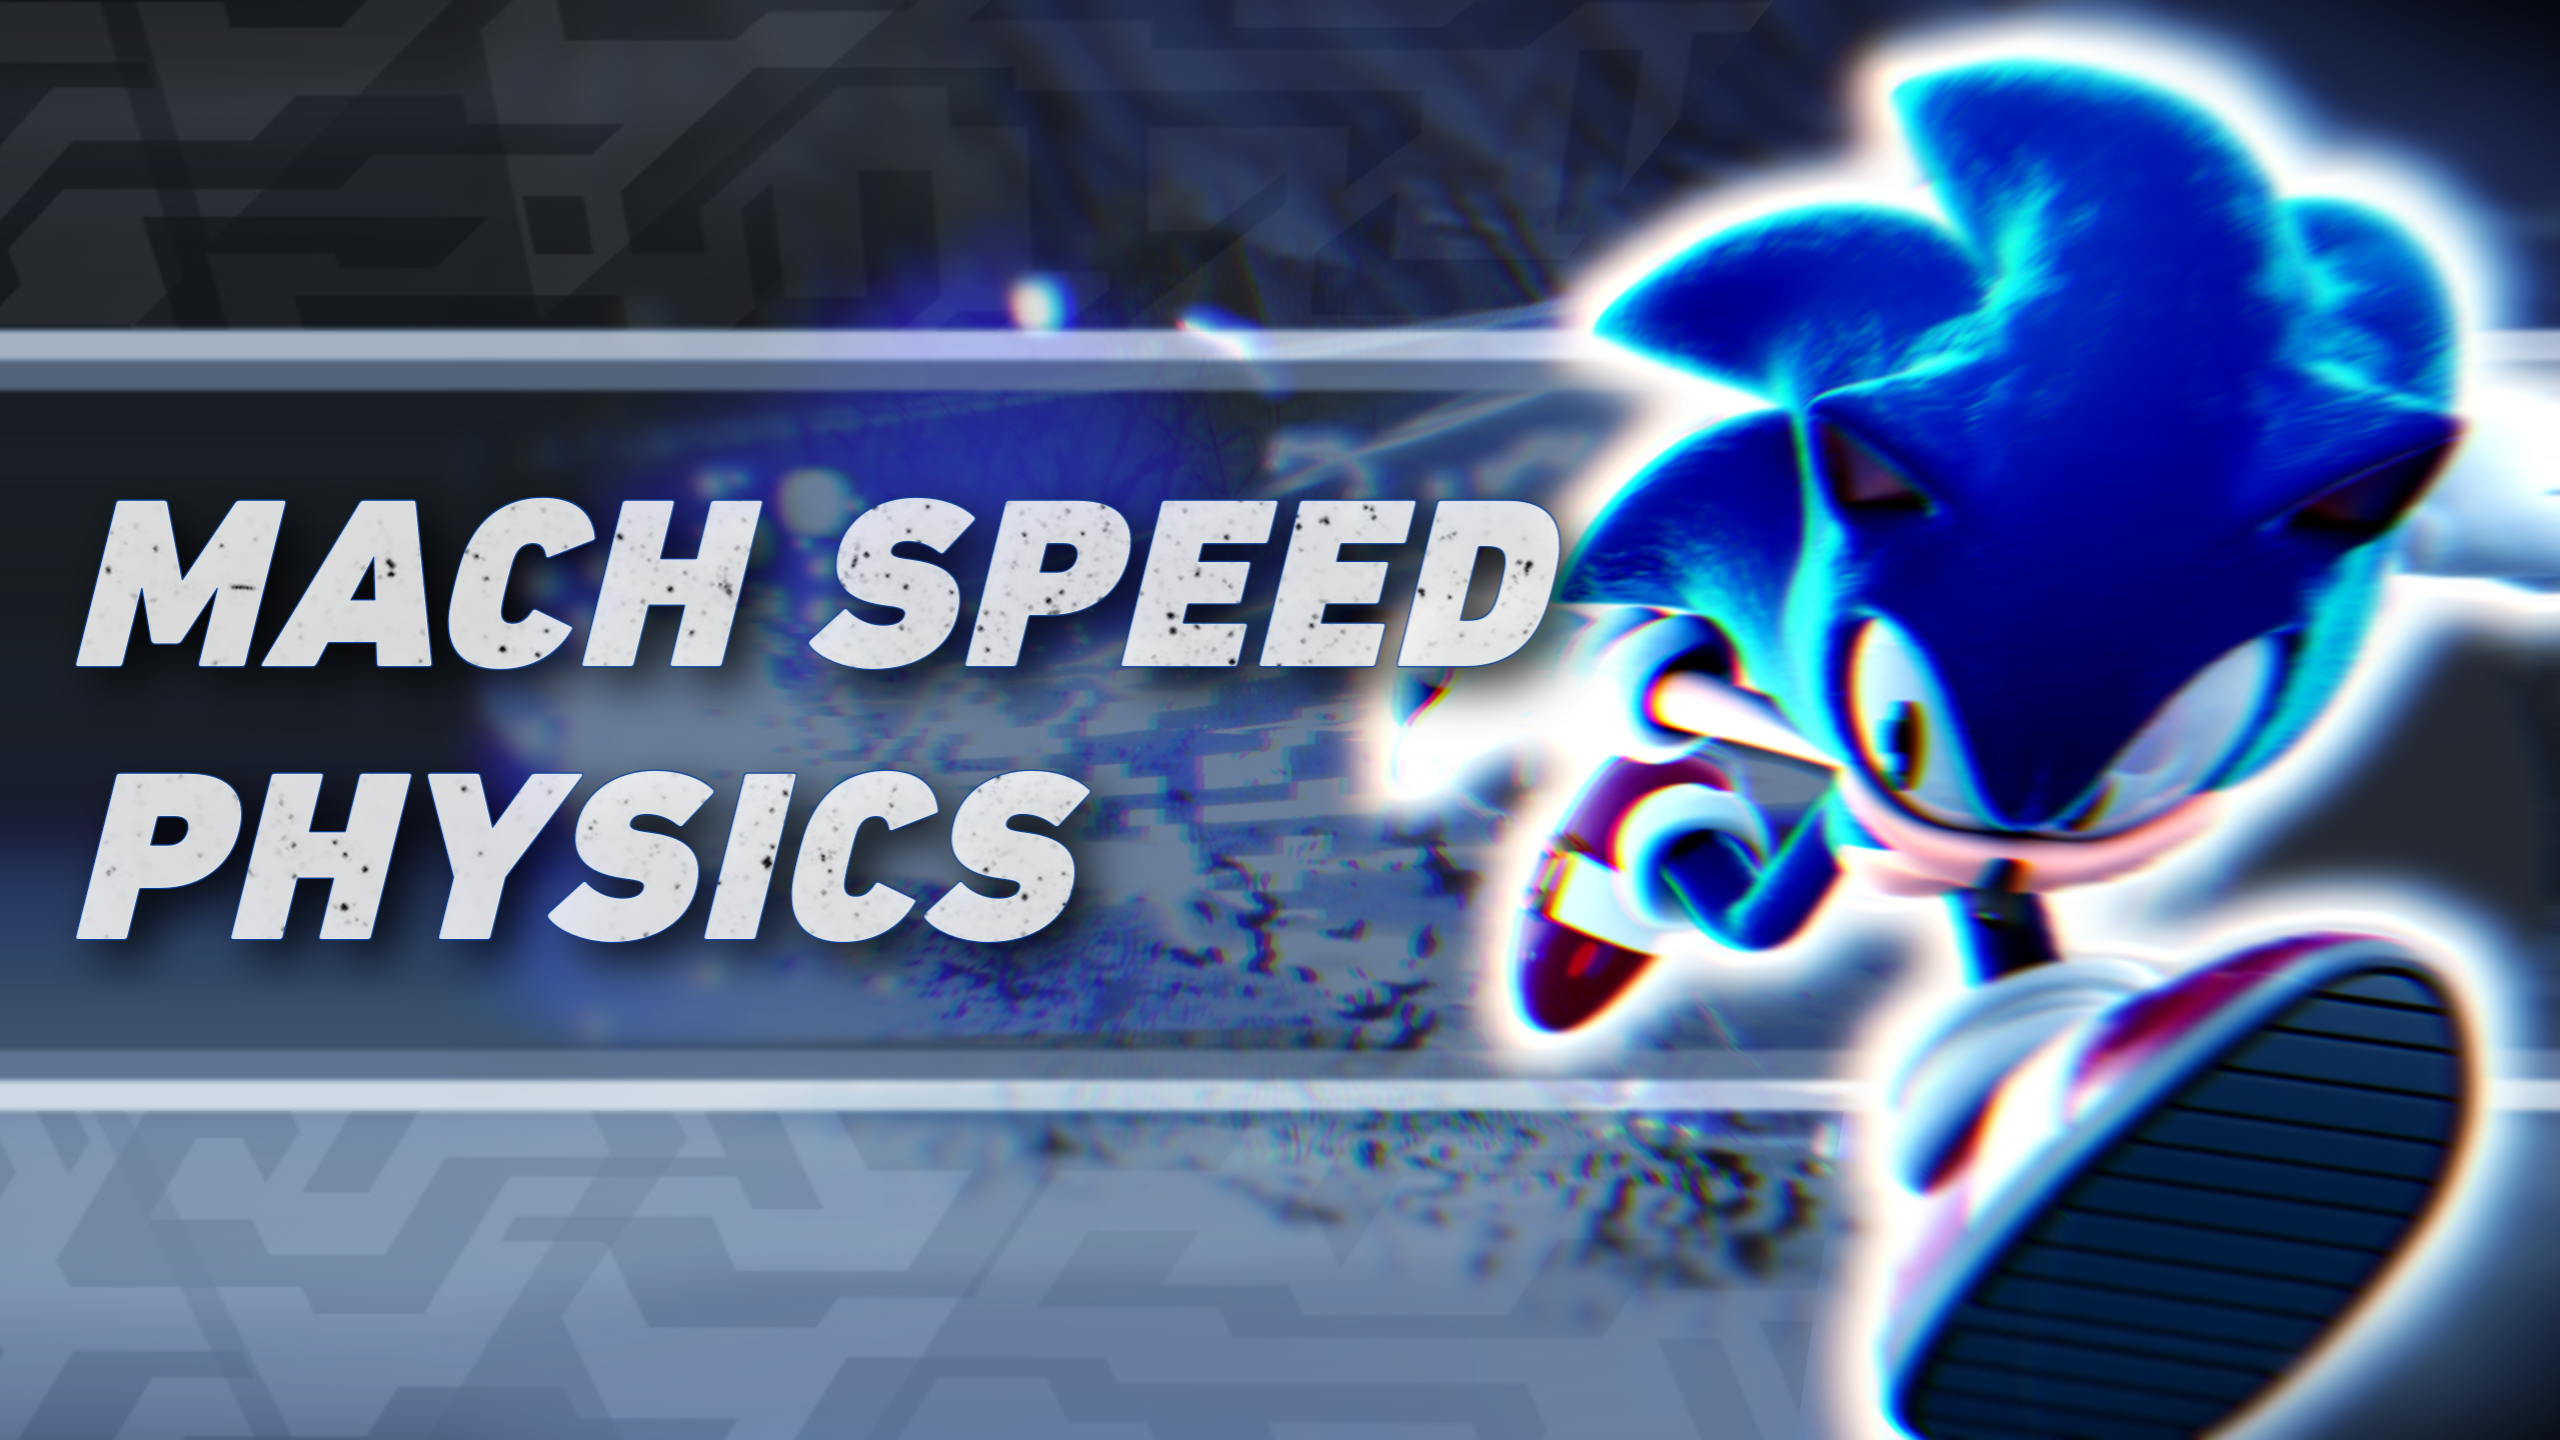 Sonic Frontiers - Fans Have ALREADY Modded The Game + Momentum